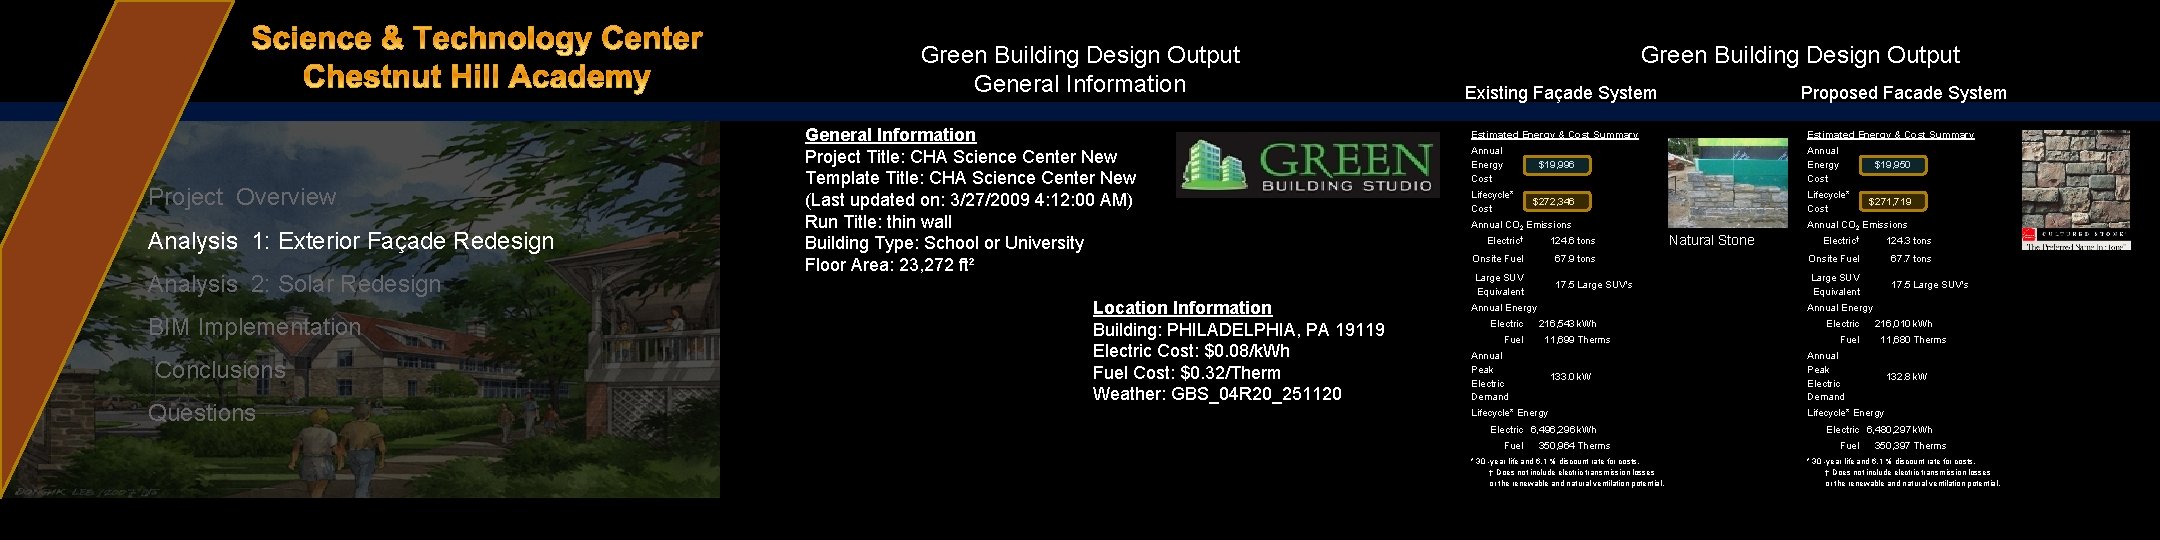 Green Building Design Output General Information Project Overview Analysis 1: Exterior Façade Redesign Analysis